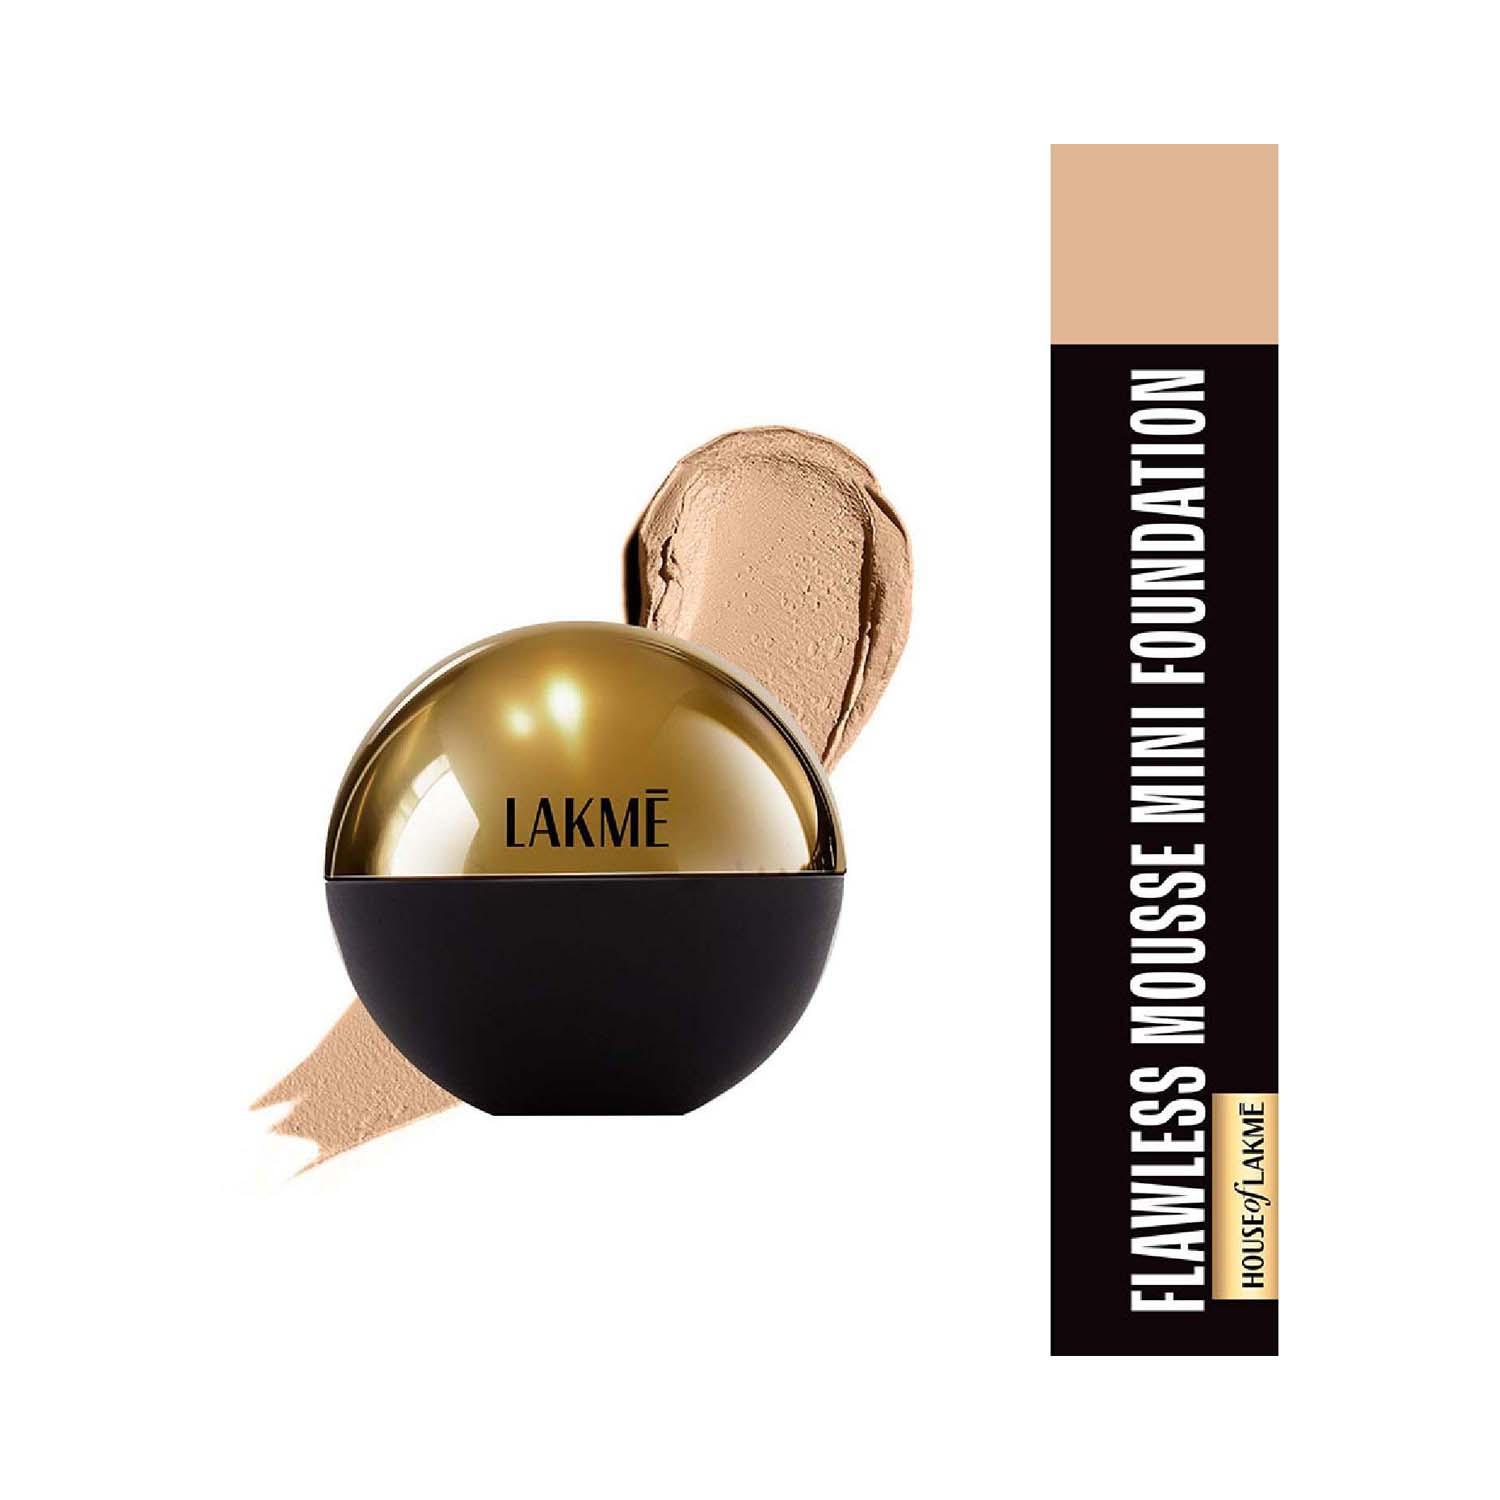 Lakme | Lakme Xtraordin Airy Mattreal Mousse - Gold Med (12 g)